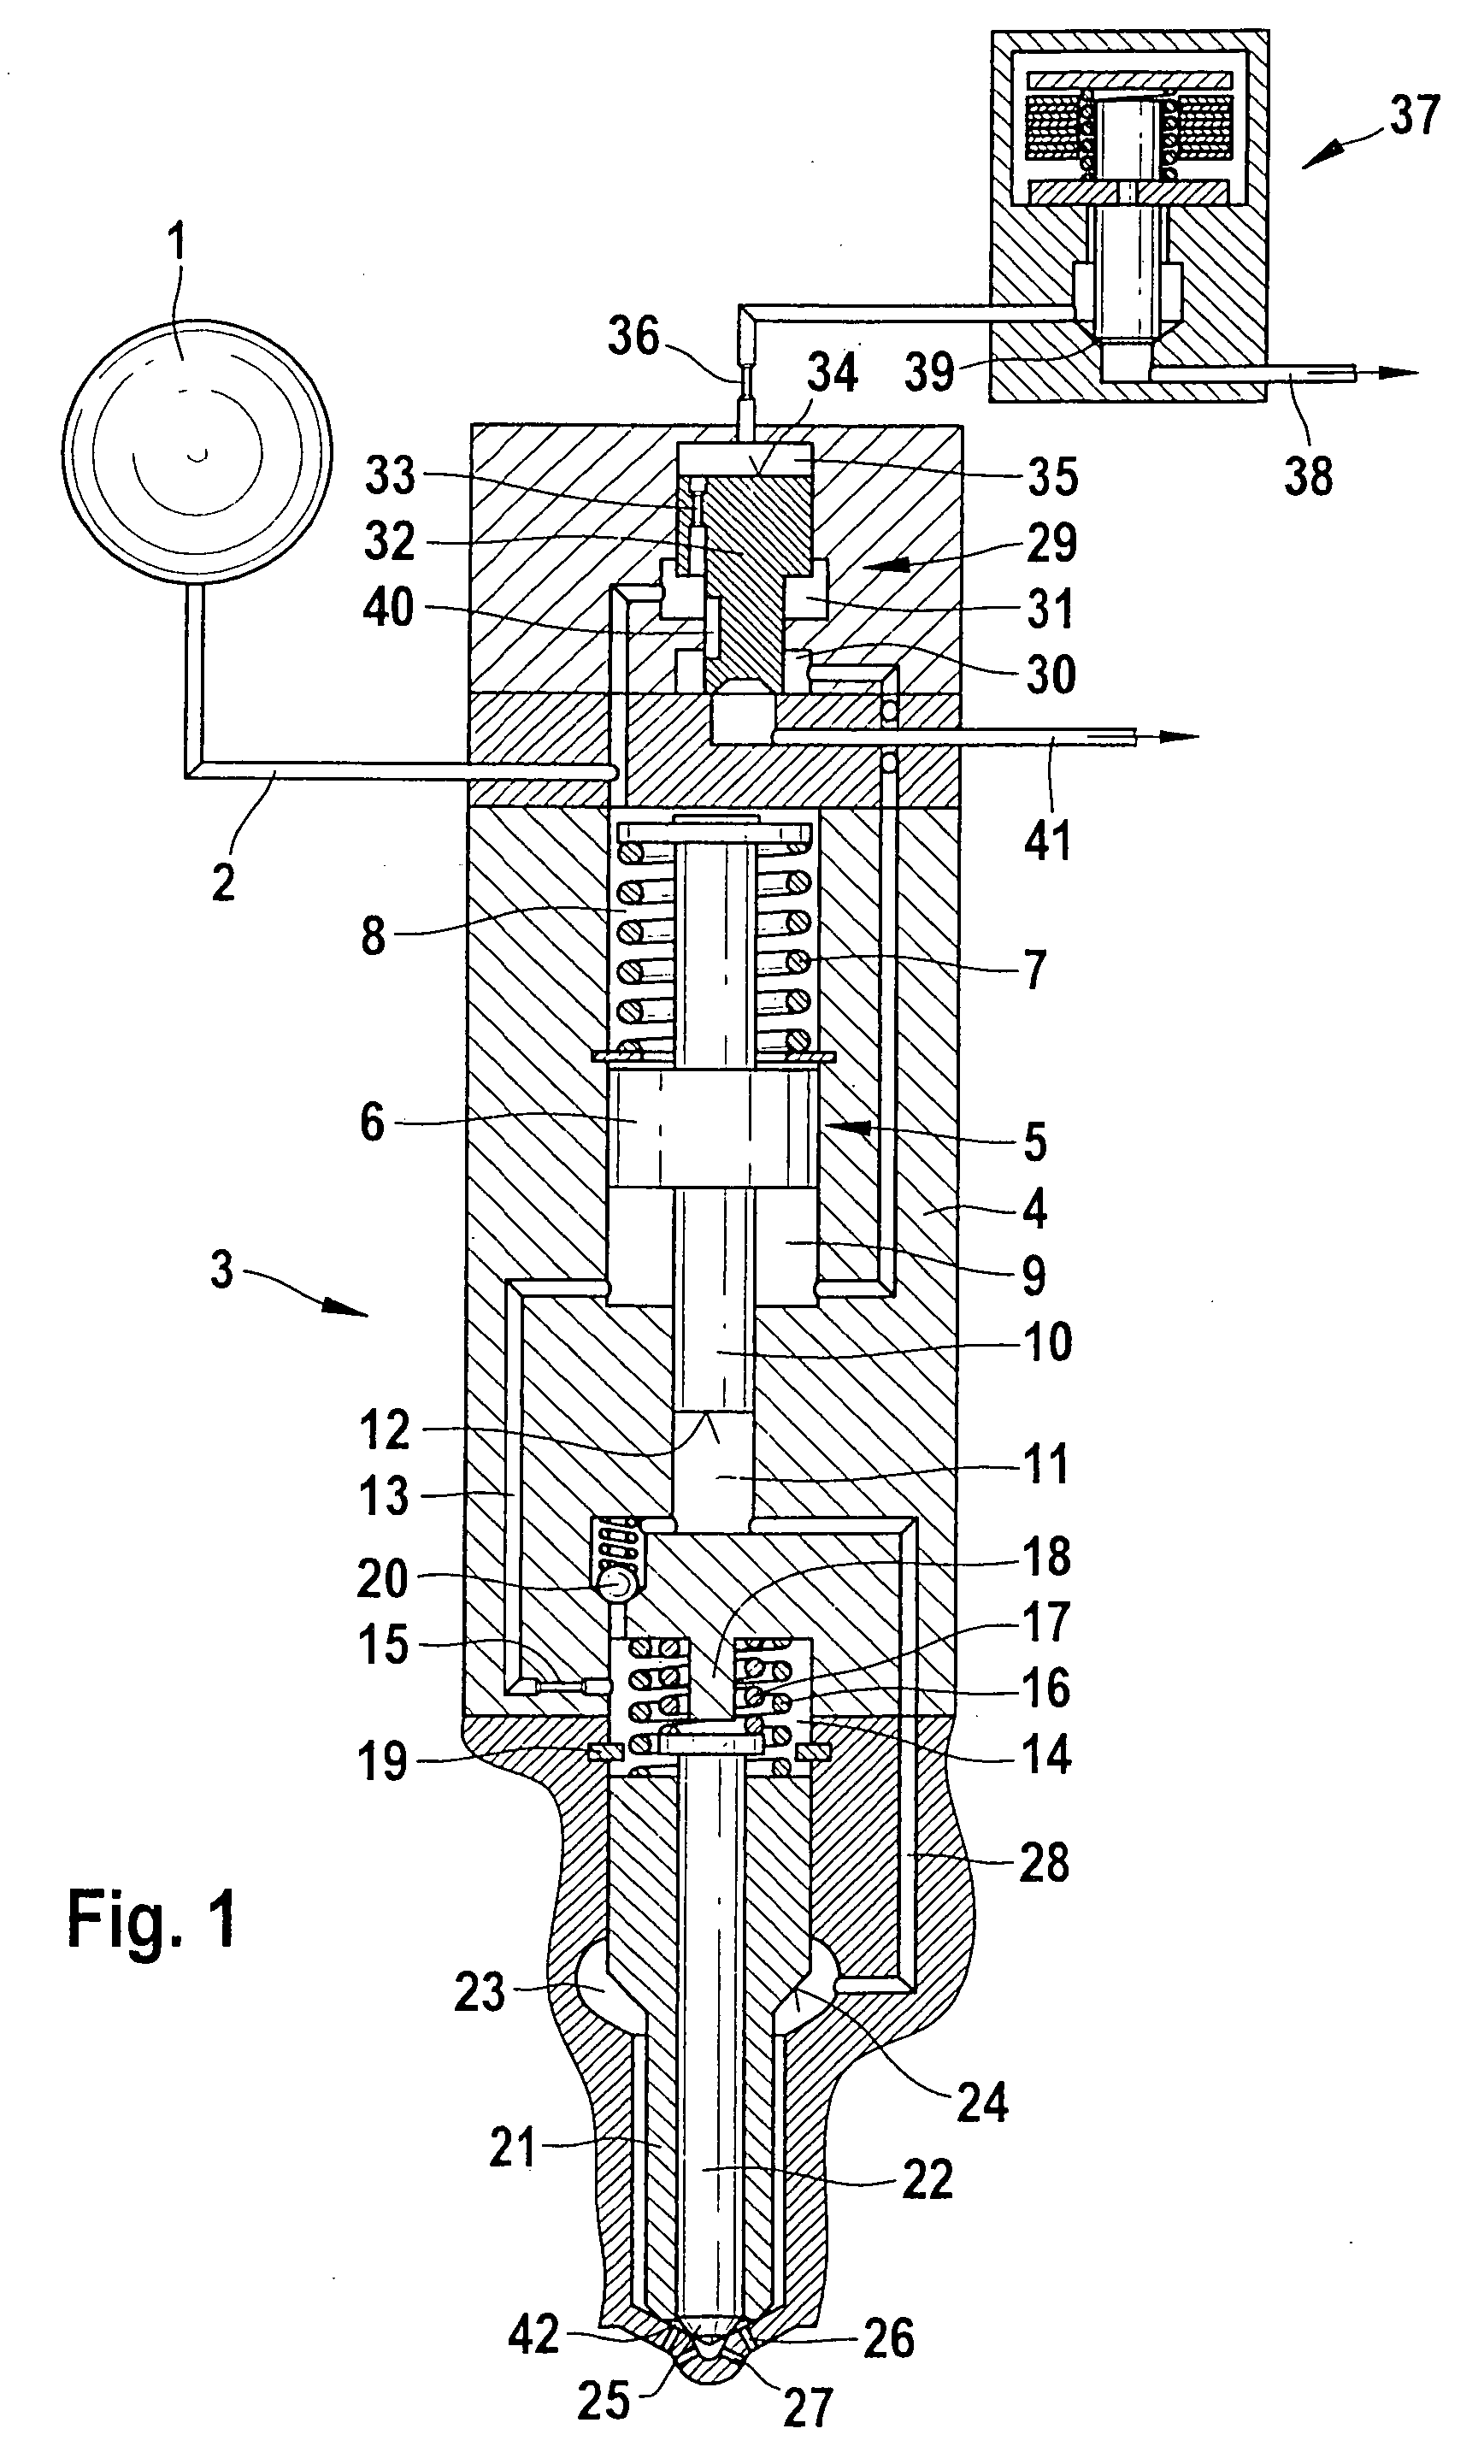 Method and device for shaping the injection pressure in a fuel injector